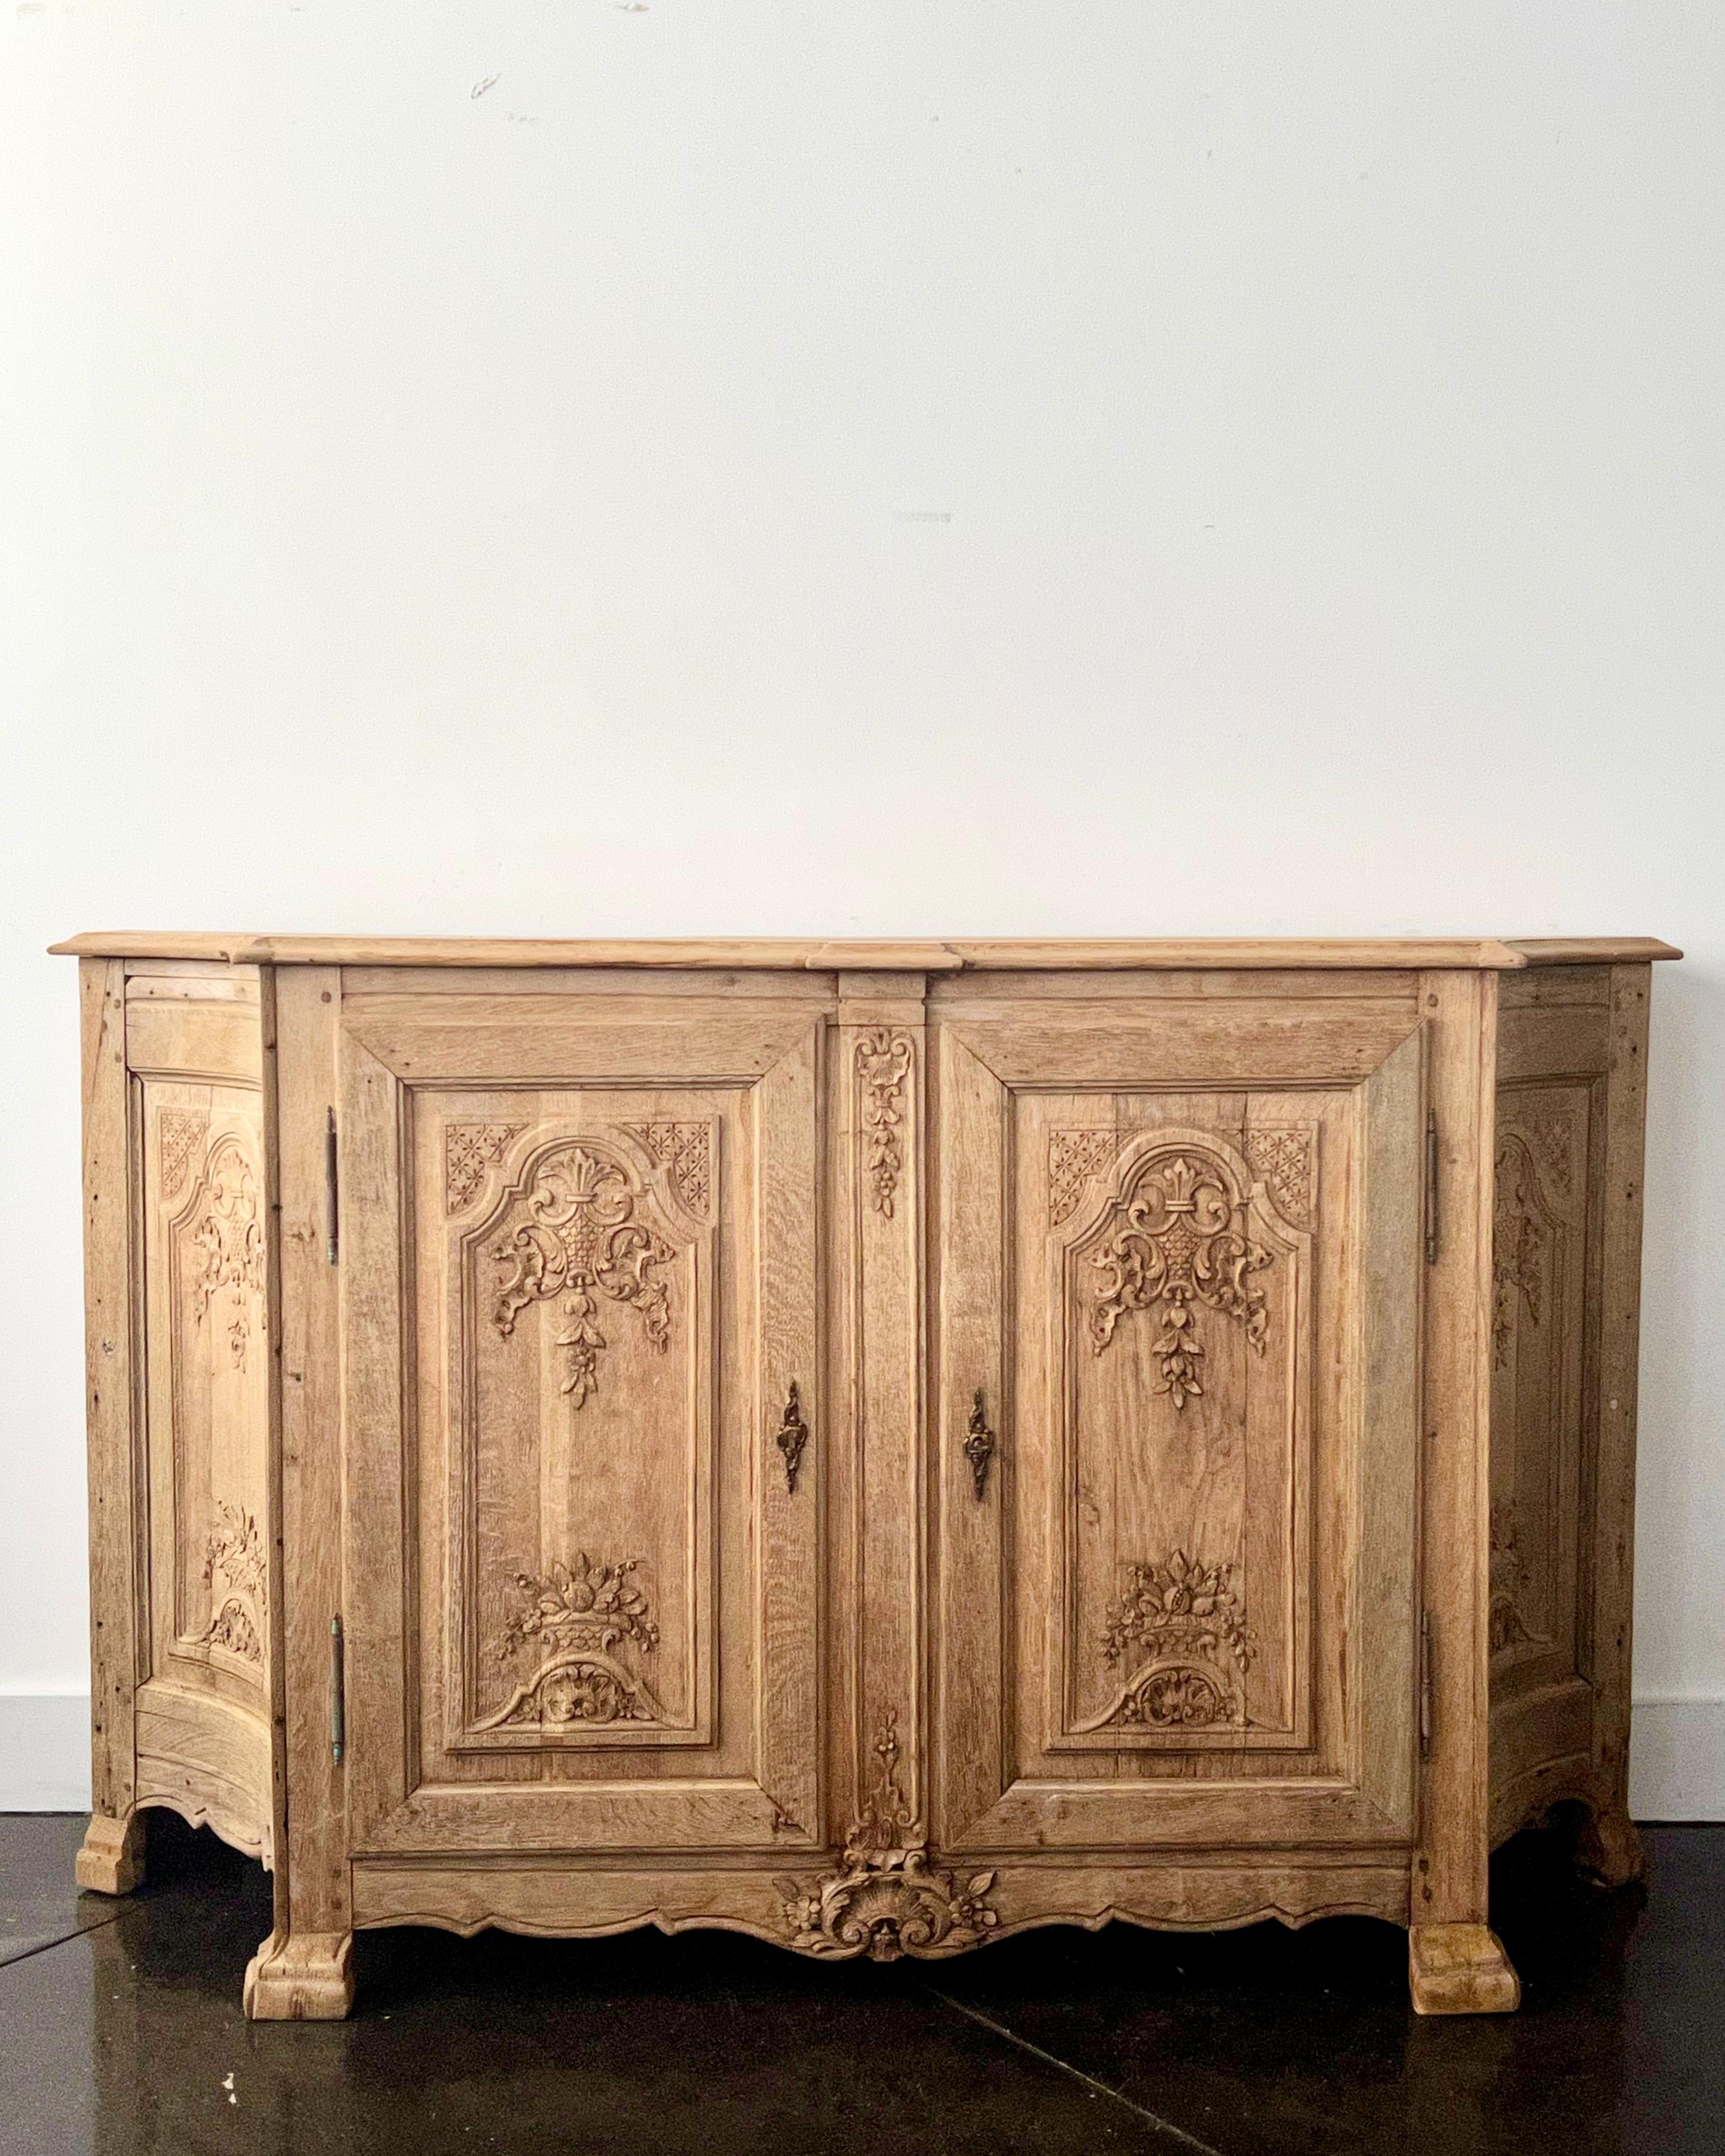 19th century French enfilade or sideboard, in Louis XV manner with shaped top and richly carved fielded door panels on front carved feet in worn stripped oak wood with a rustic ironwork.
France, late 19th century.
More than ever, we selected the